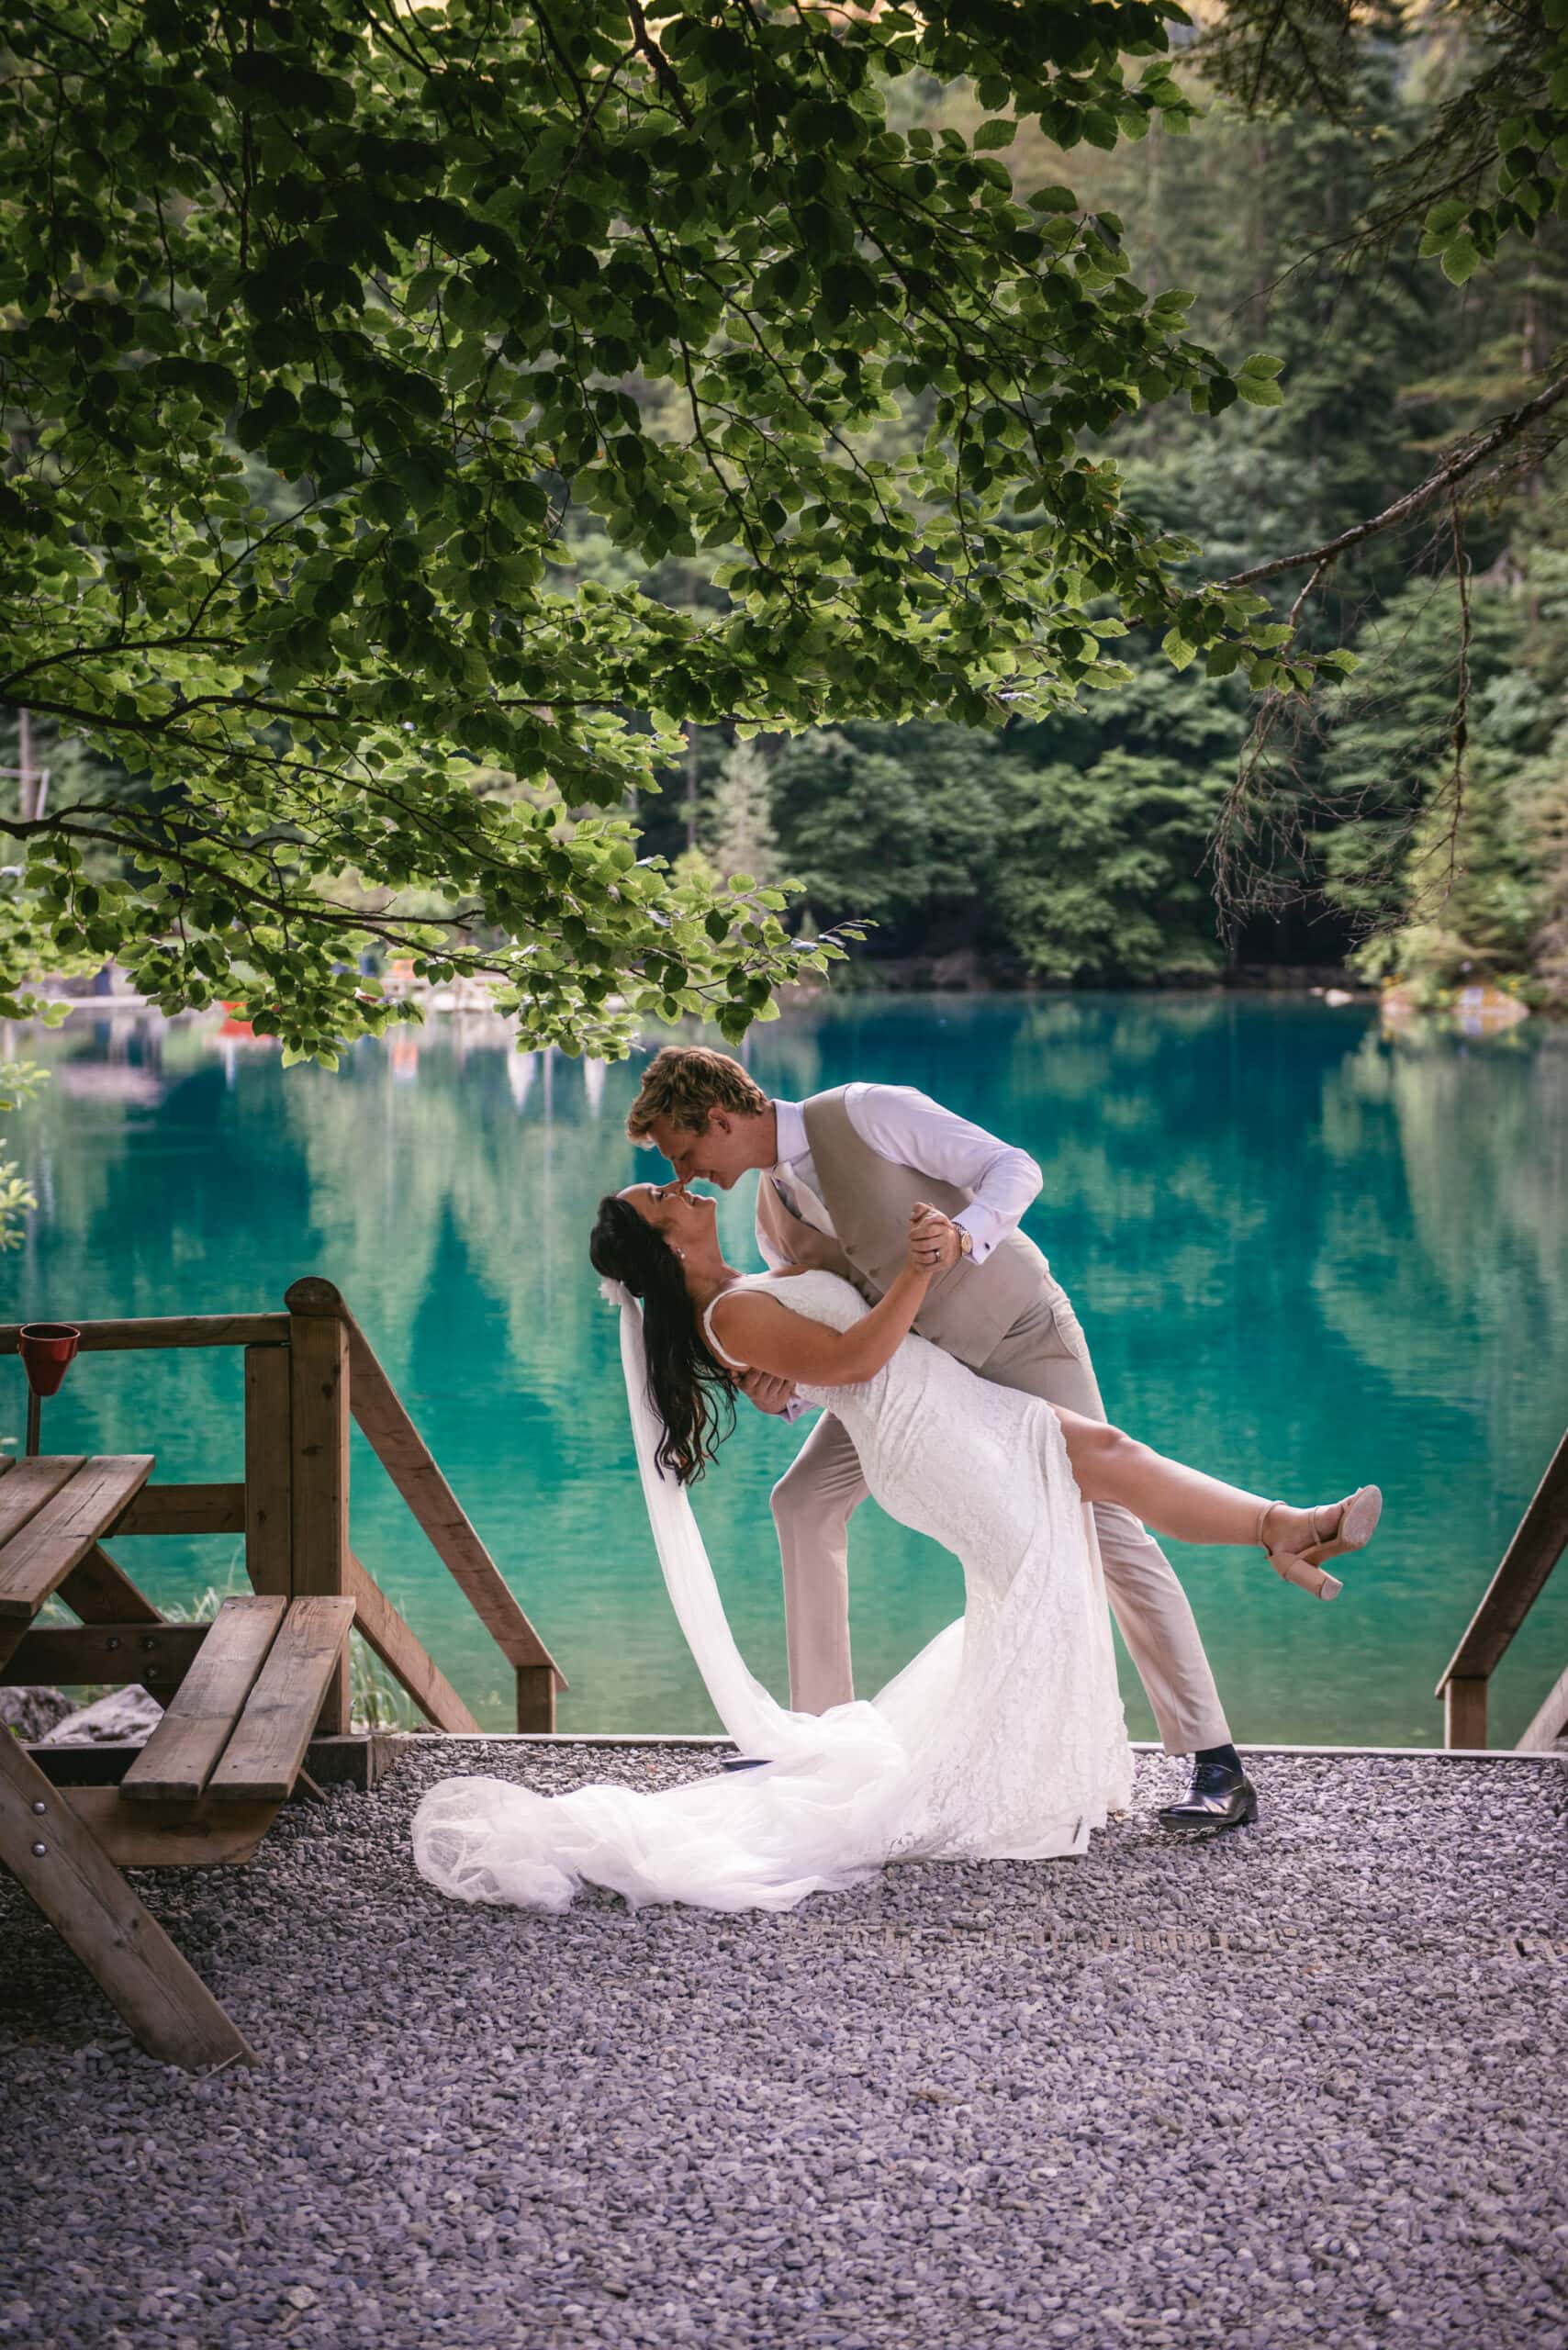 Peaks witnessed their journey - a captivating hiking elopement.